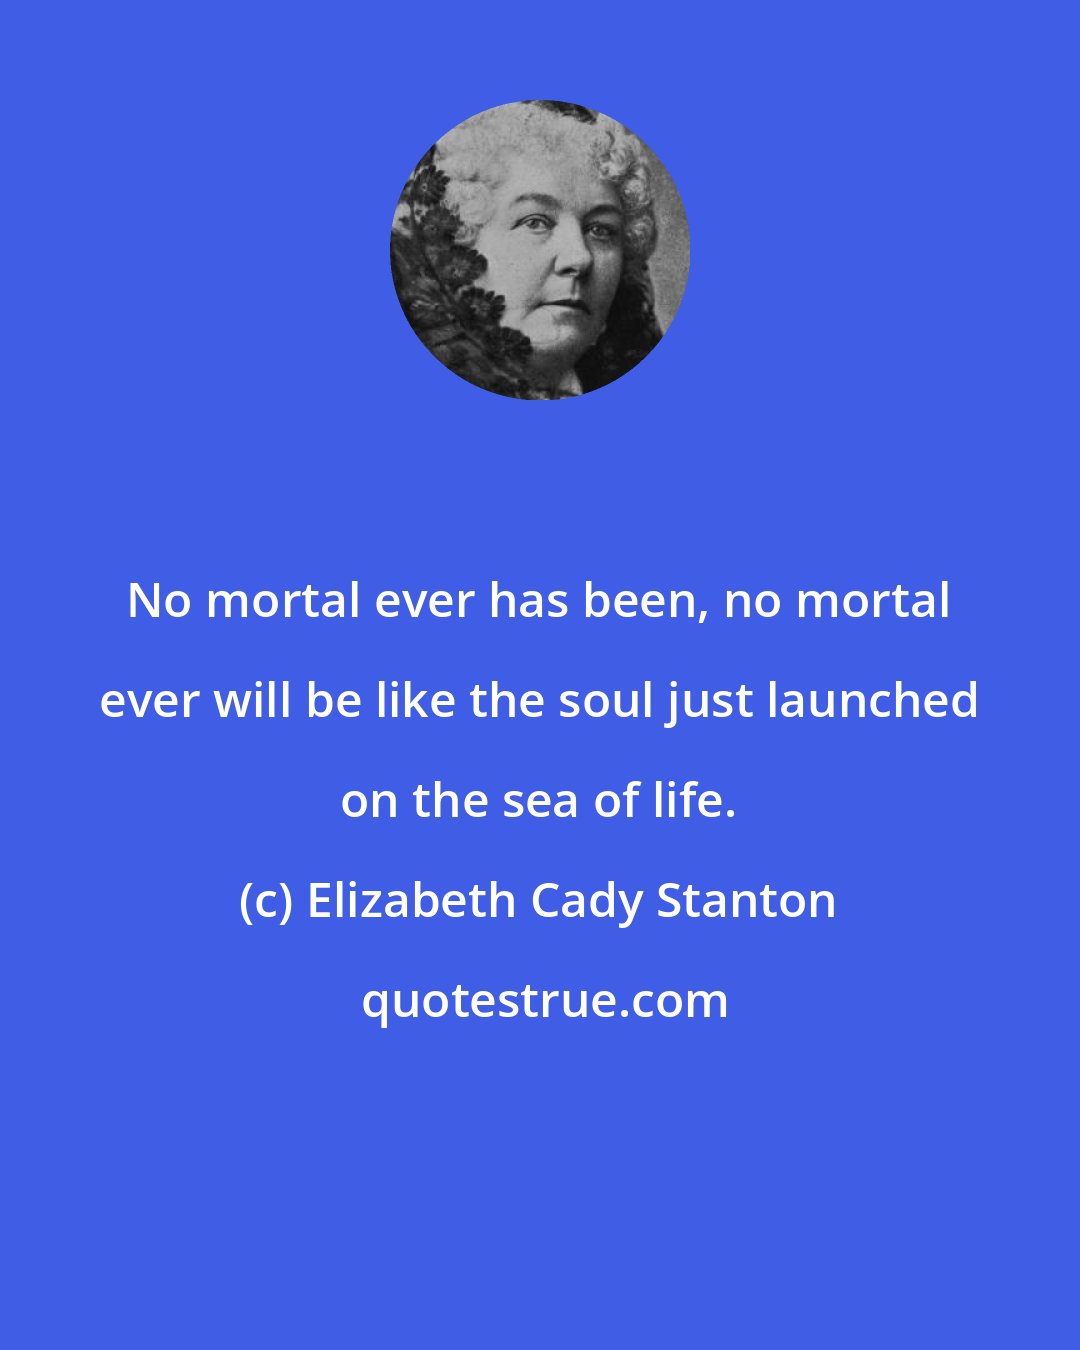 Elizabeth Cady Stanton: No mortal ever has been, no mortal ever will be like the soul just launched on the sea of life.